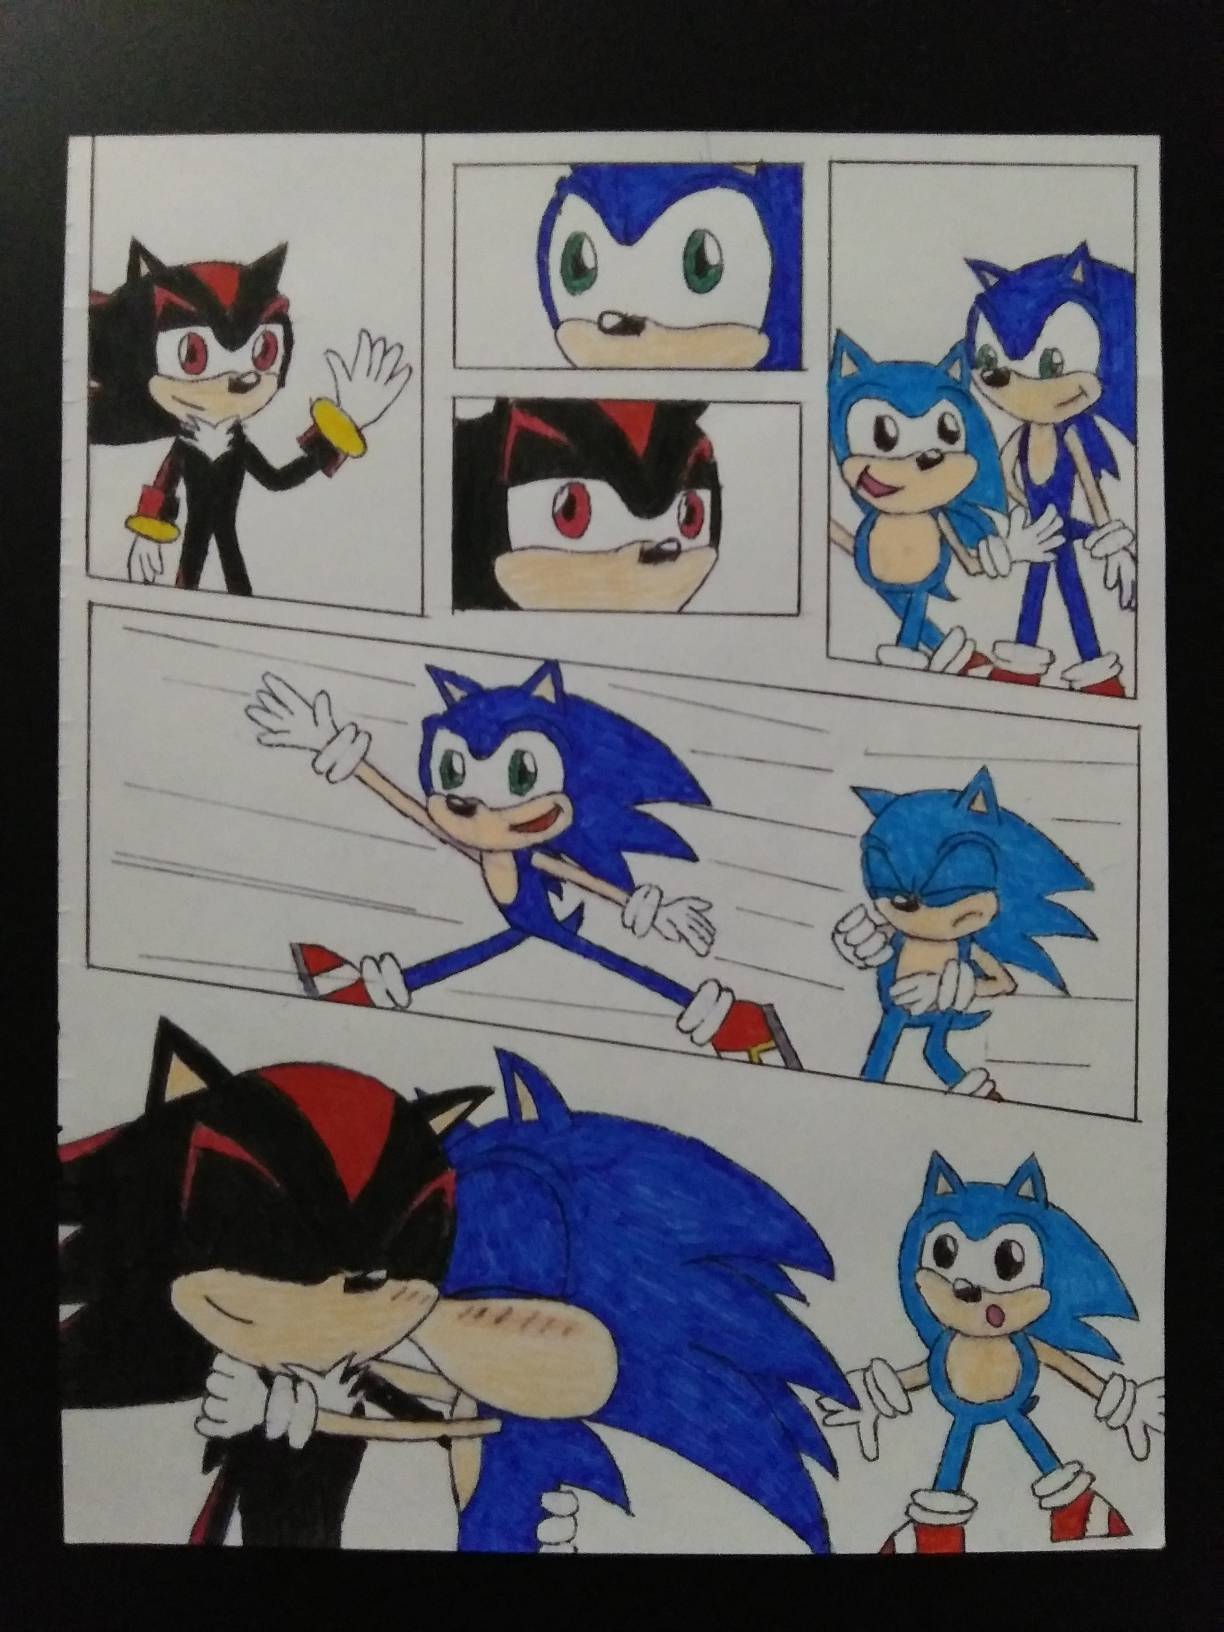 Shadow x Tails on A-A-Sonic-Shipping - DeviantArt